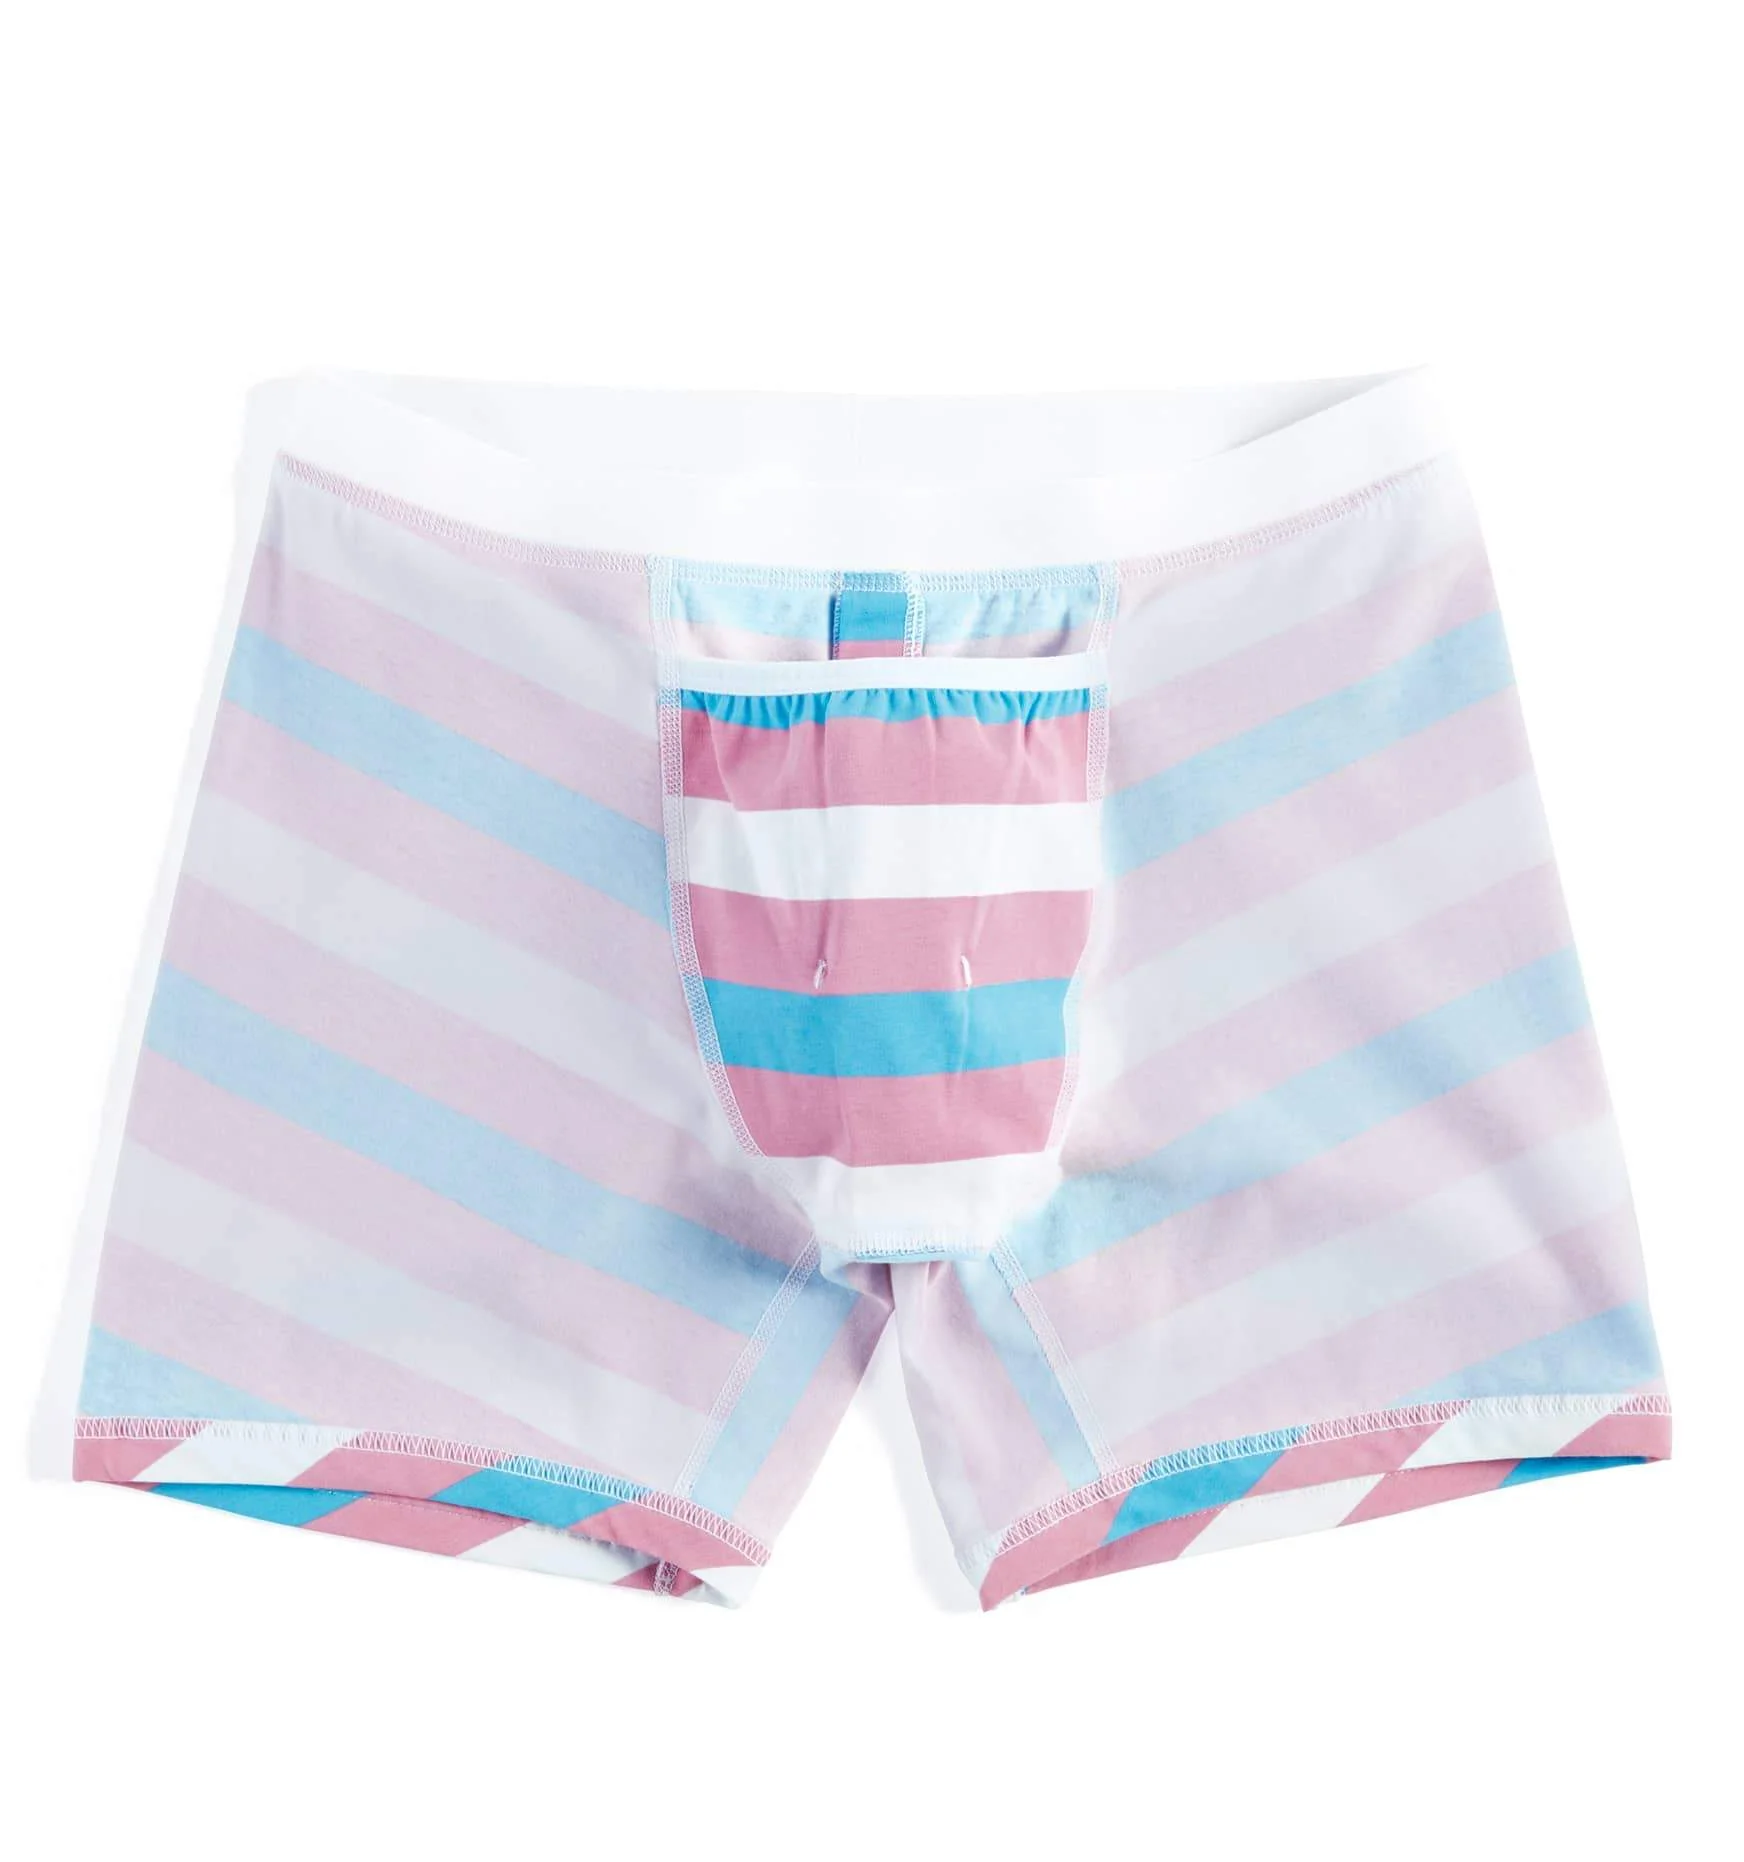 TomboyX + 6″ Fly Packing Boxer Briefs